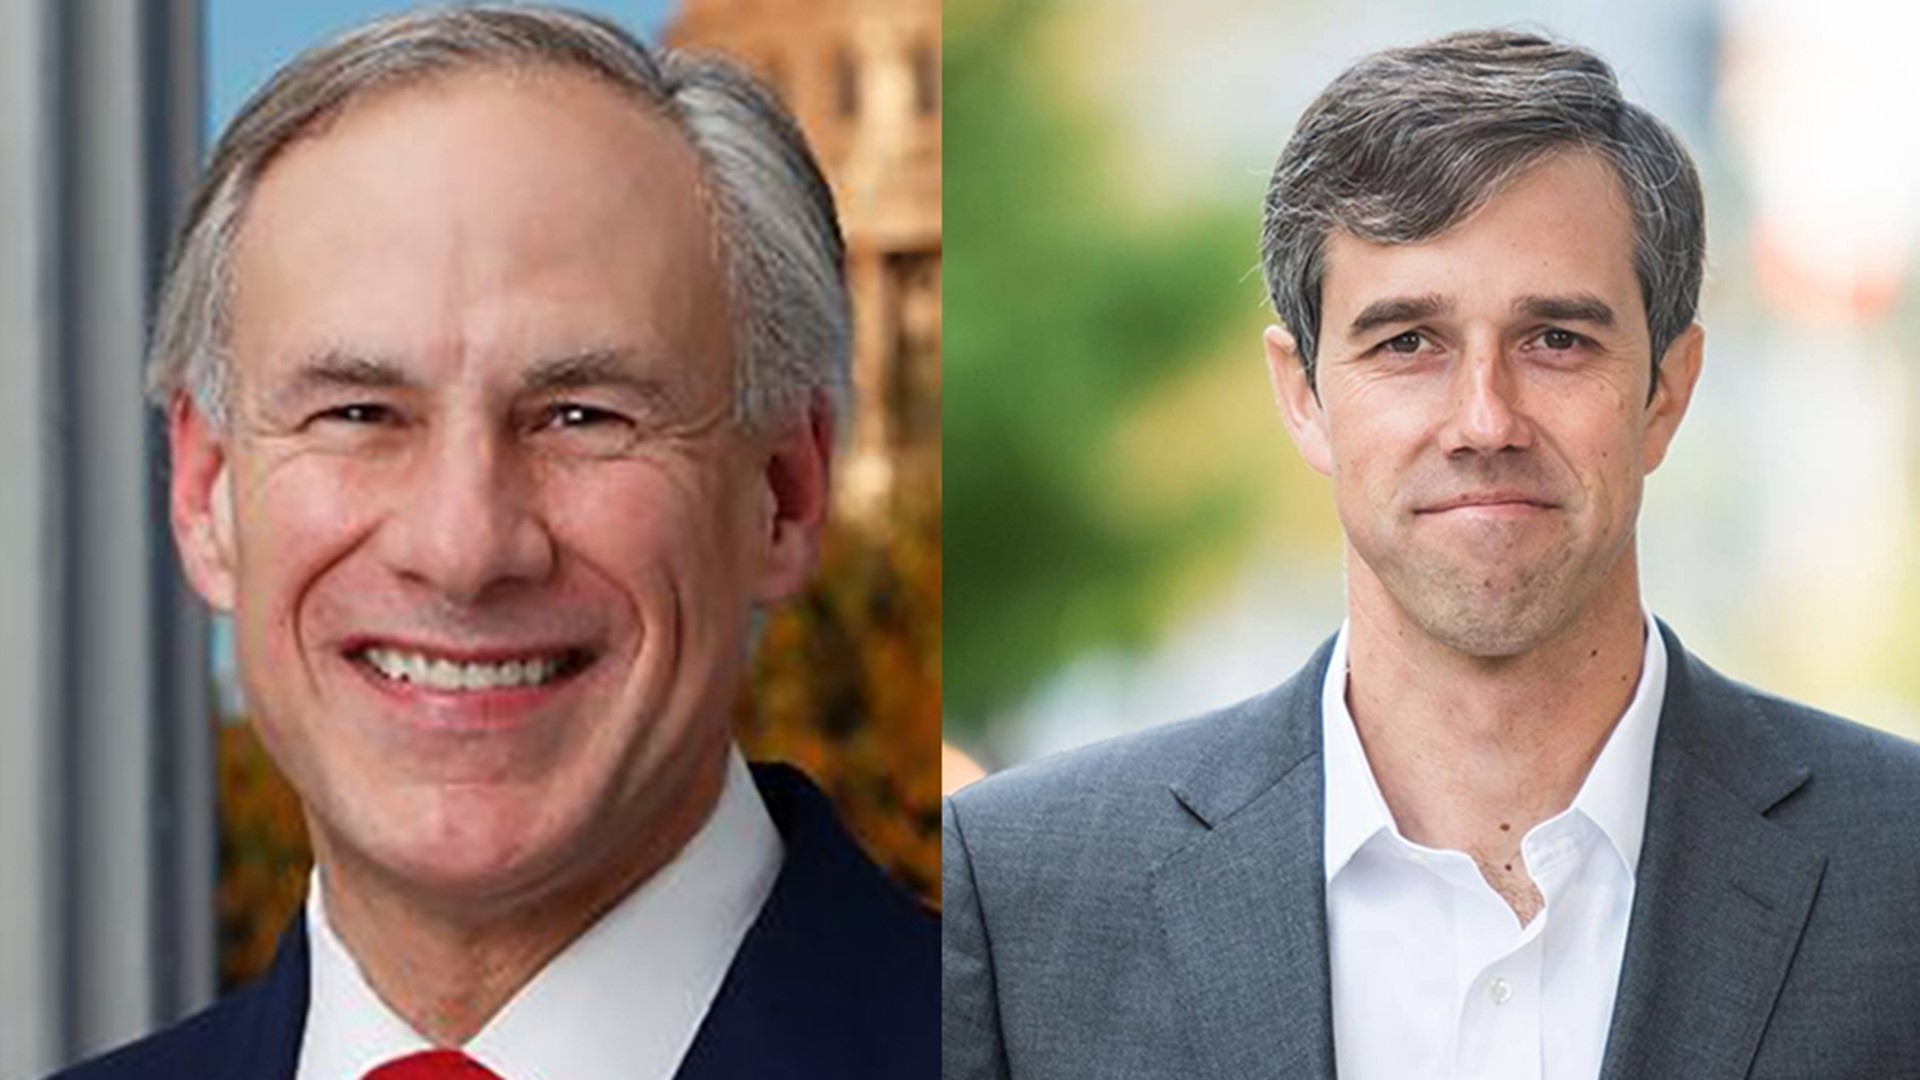 Abbott led O'Rourke 42% to 40%, while 7% said they would vote for someone else.